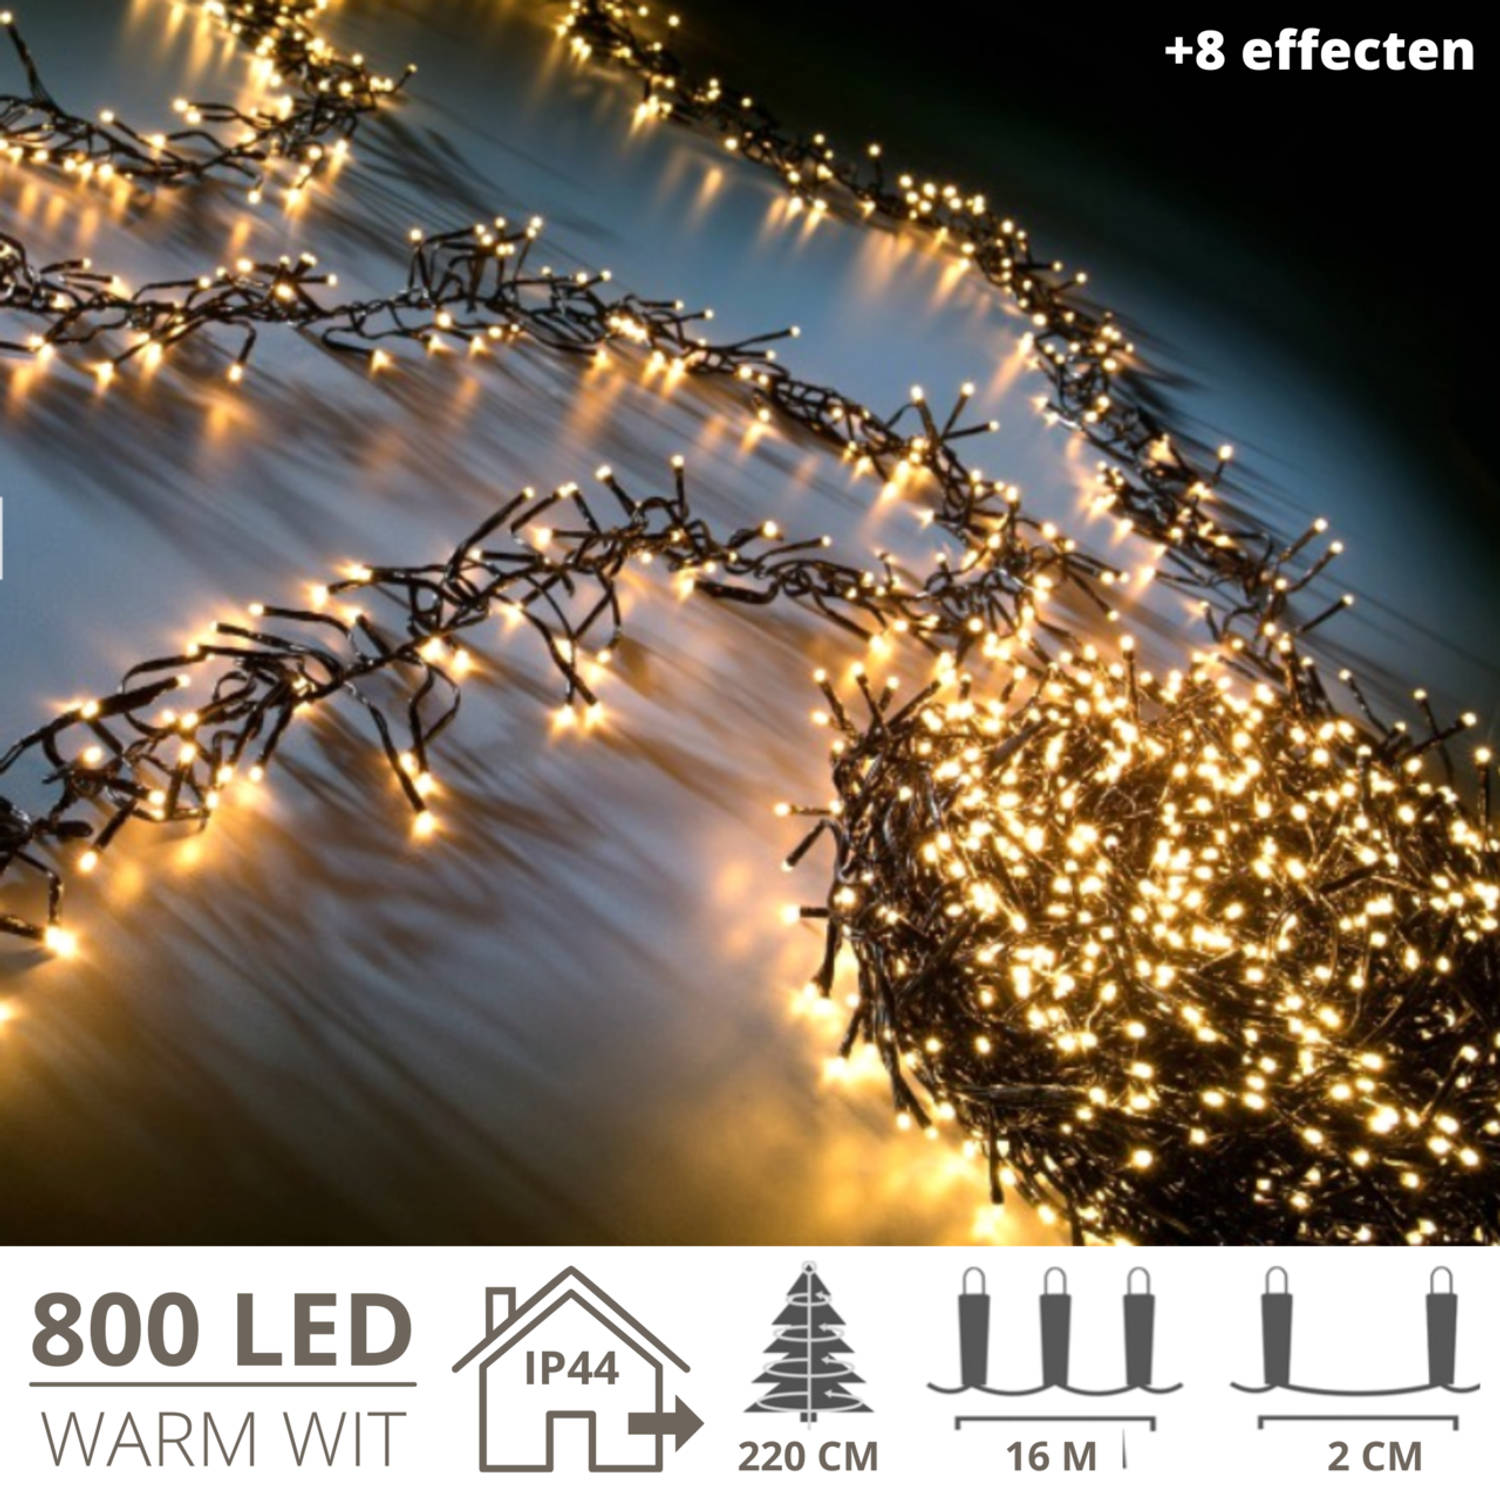 Kerstverlichting - Kerstboomverlichting - Kerstversiering - Kerst - 800 LED&apos;s - 16 meter - Extra warm wit